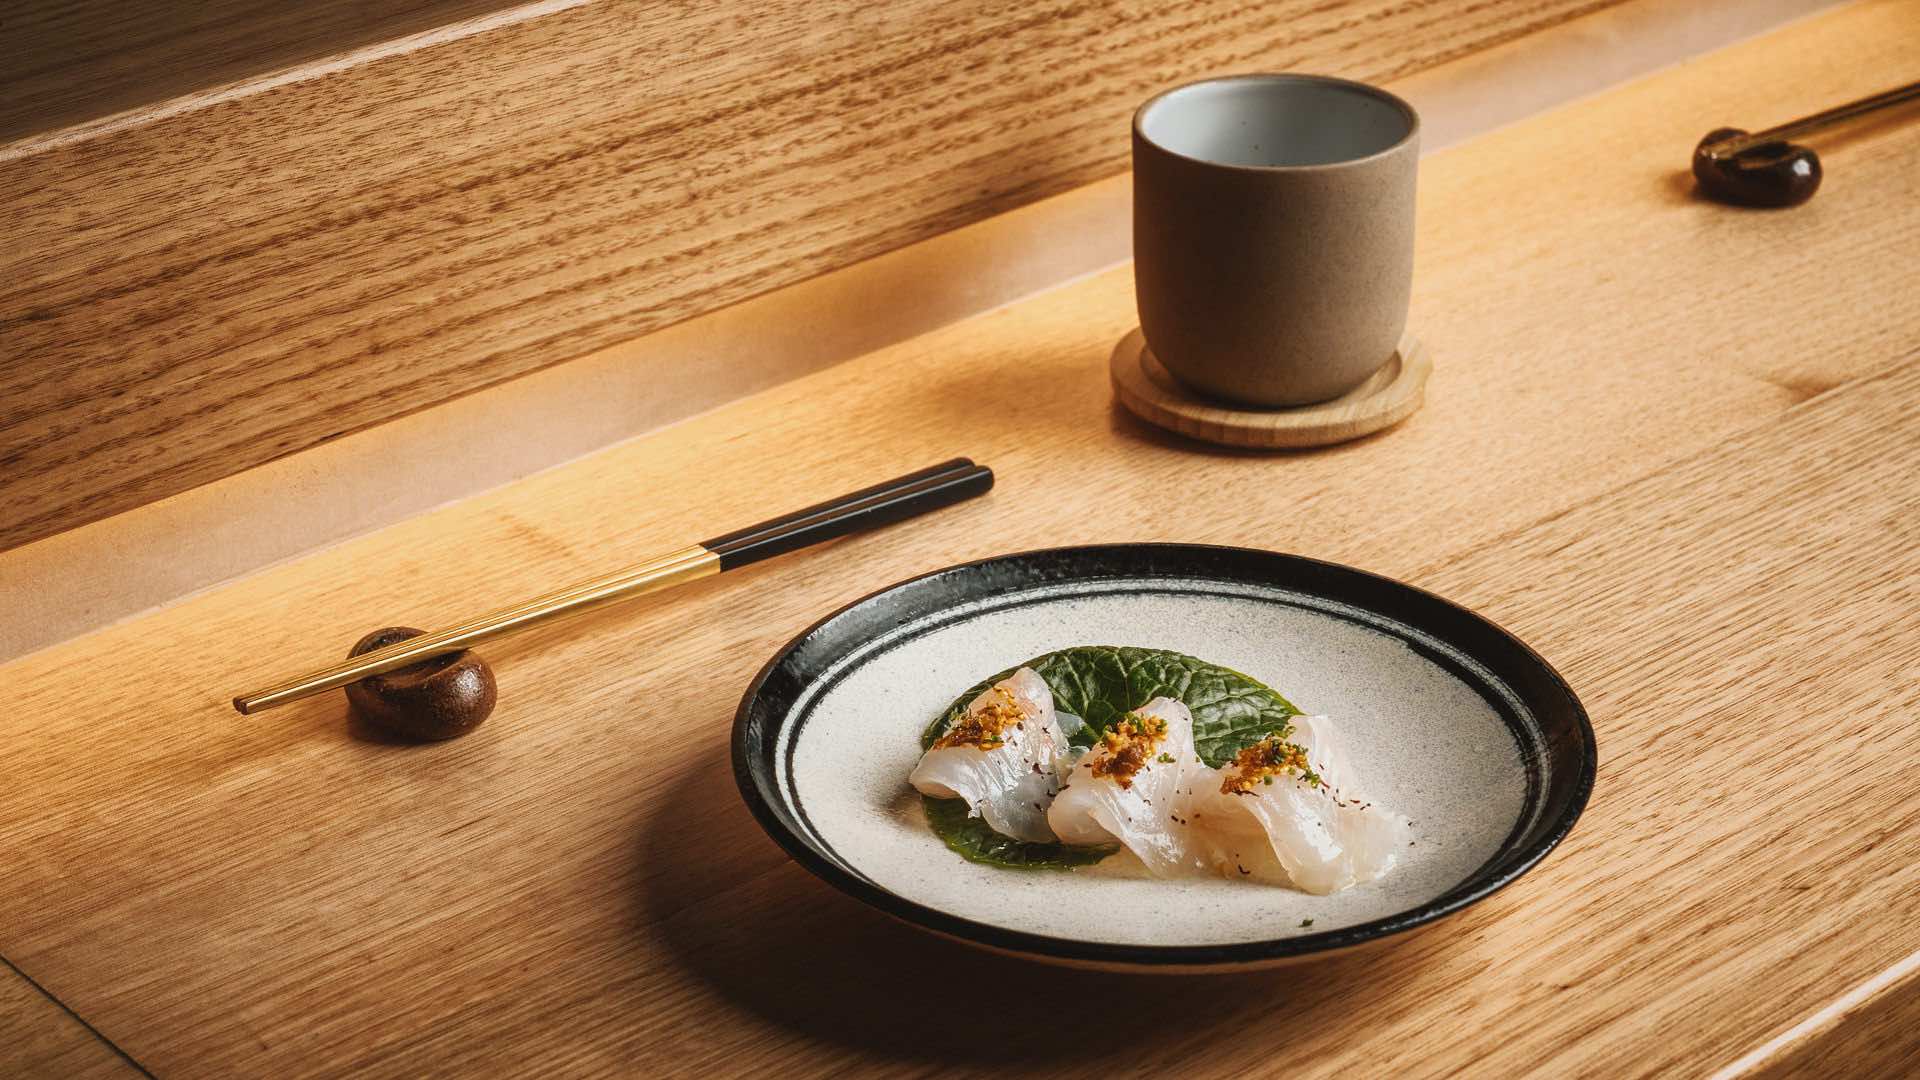 Score a $2500 Experience to a Waterfront Omakase Restaurant in The Rocks